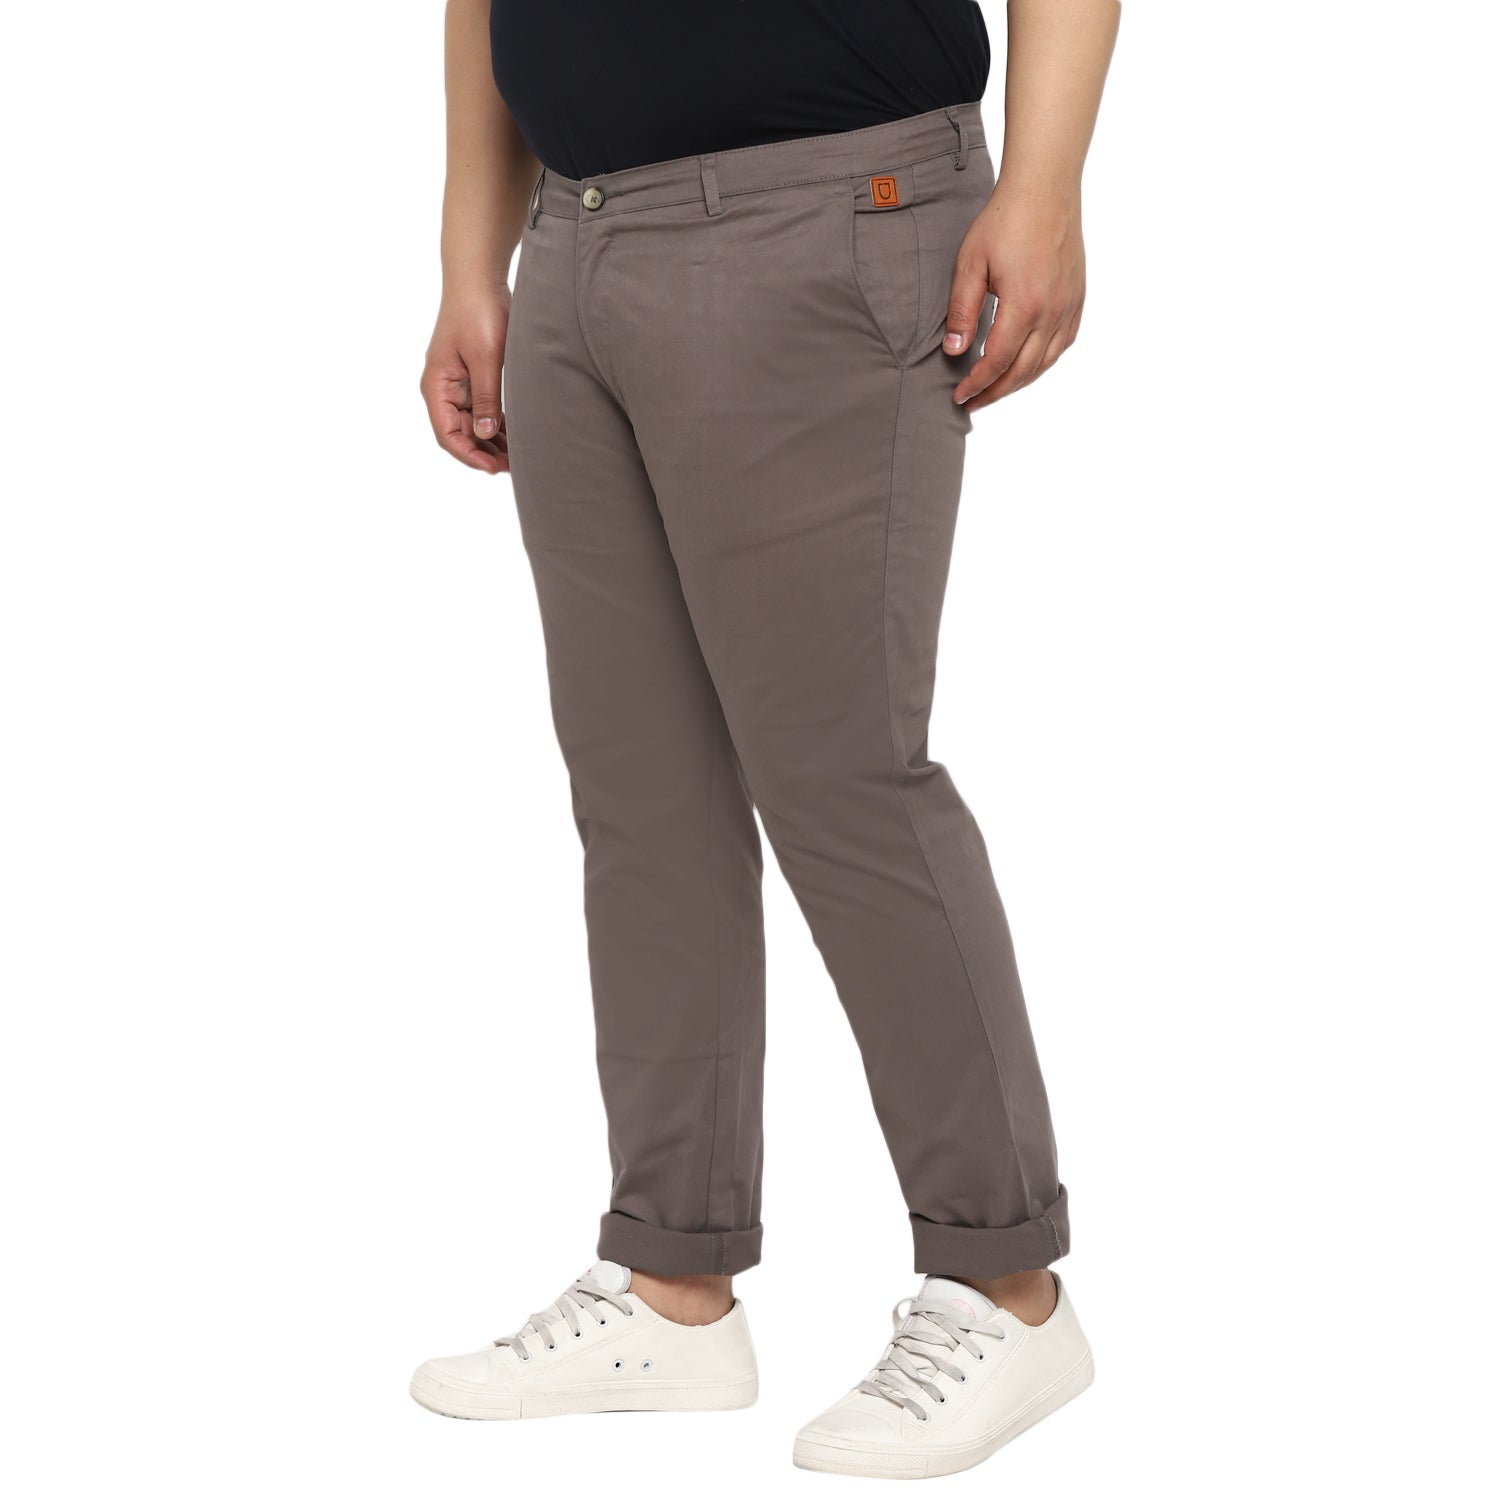 Men's Dark Grey Cotton Regular Fit Casual Chinos Trousers Stretch